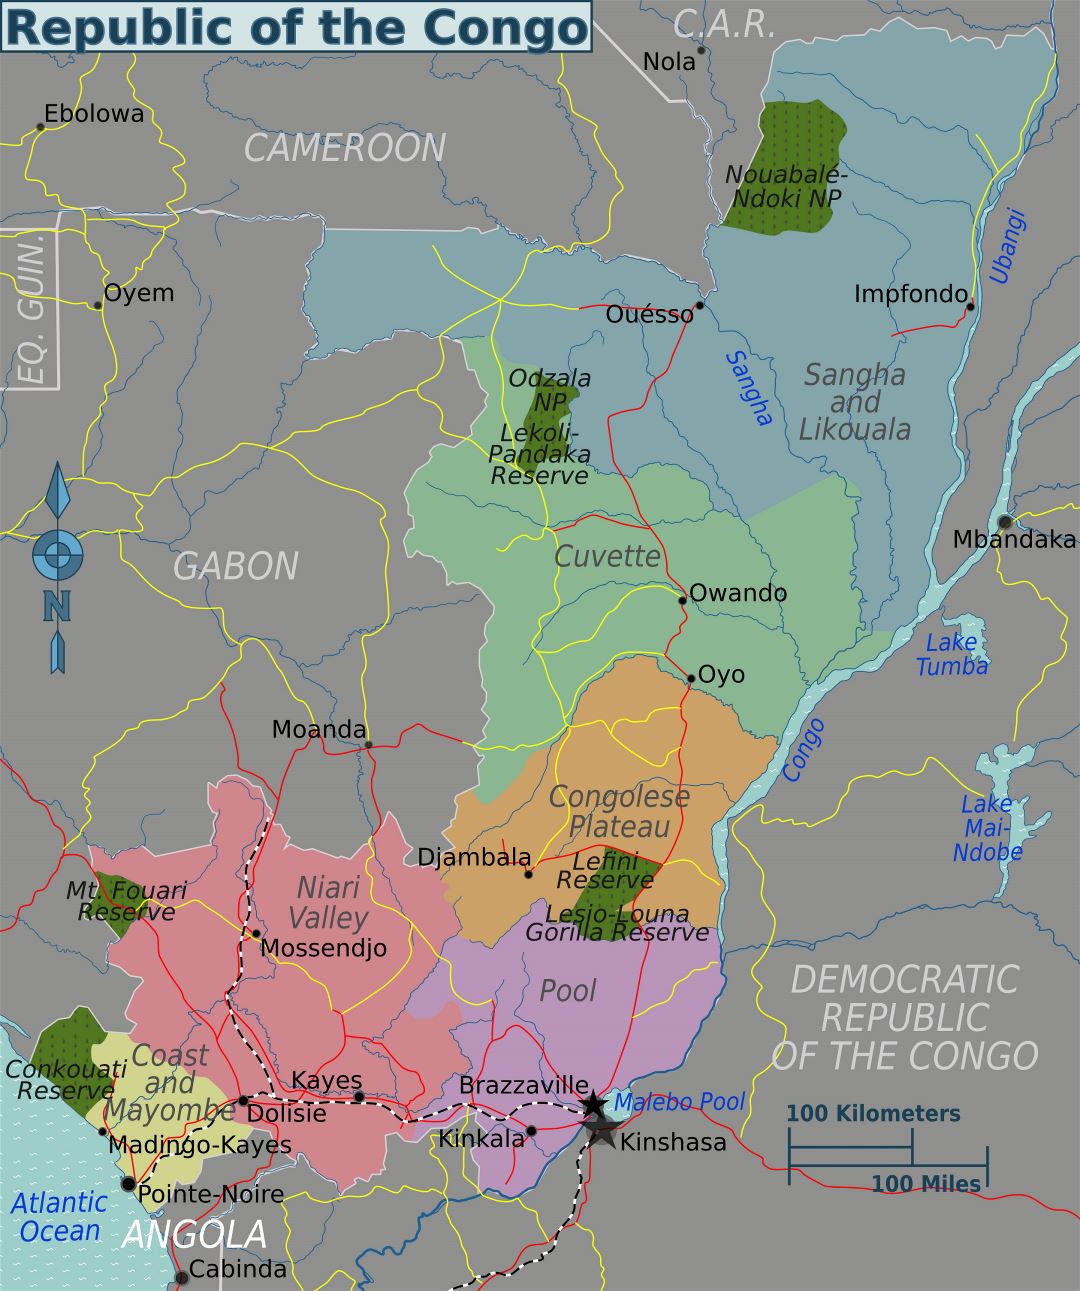 Large regions map of Congo